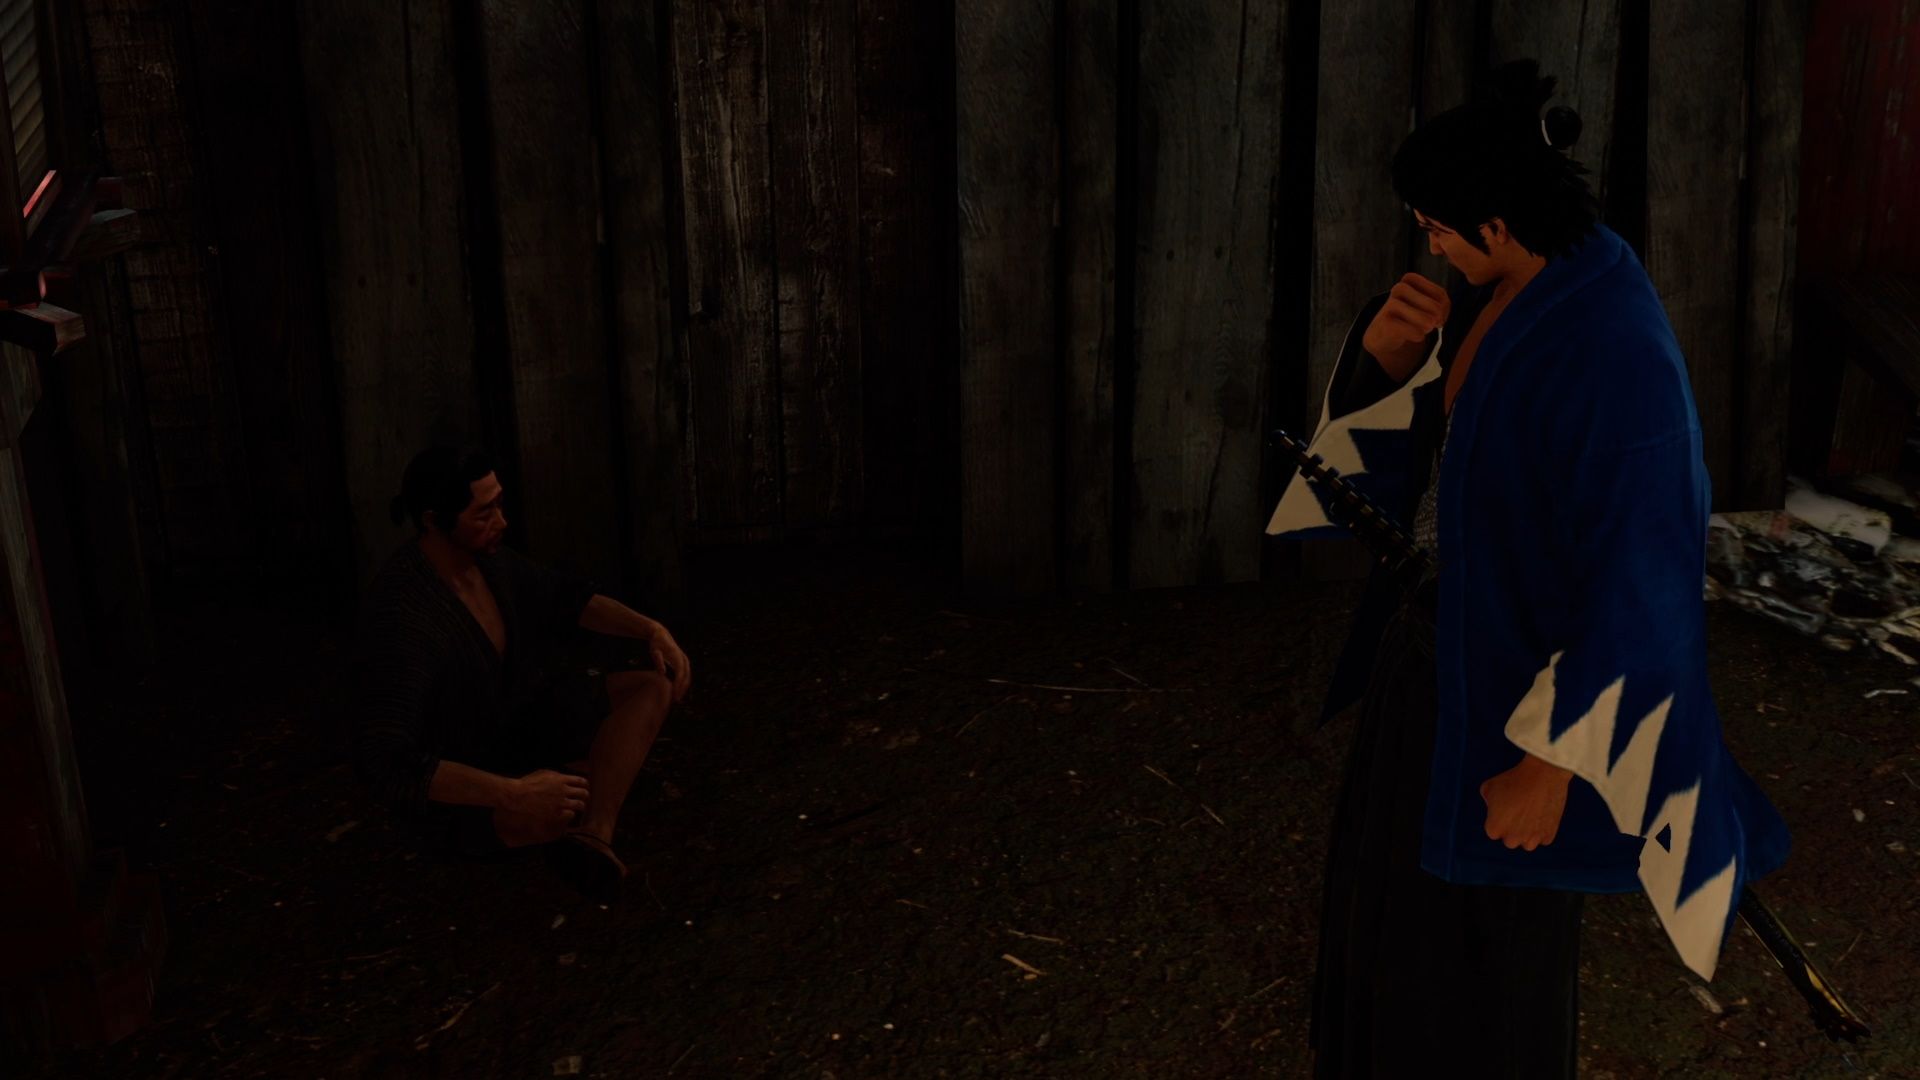 Like A Dragon Ishin, The Servile Beggar asks Ryoma for some food